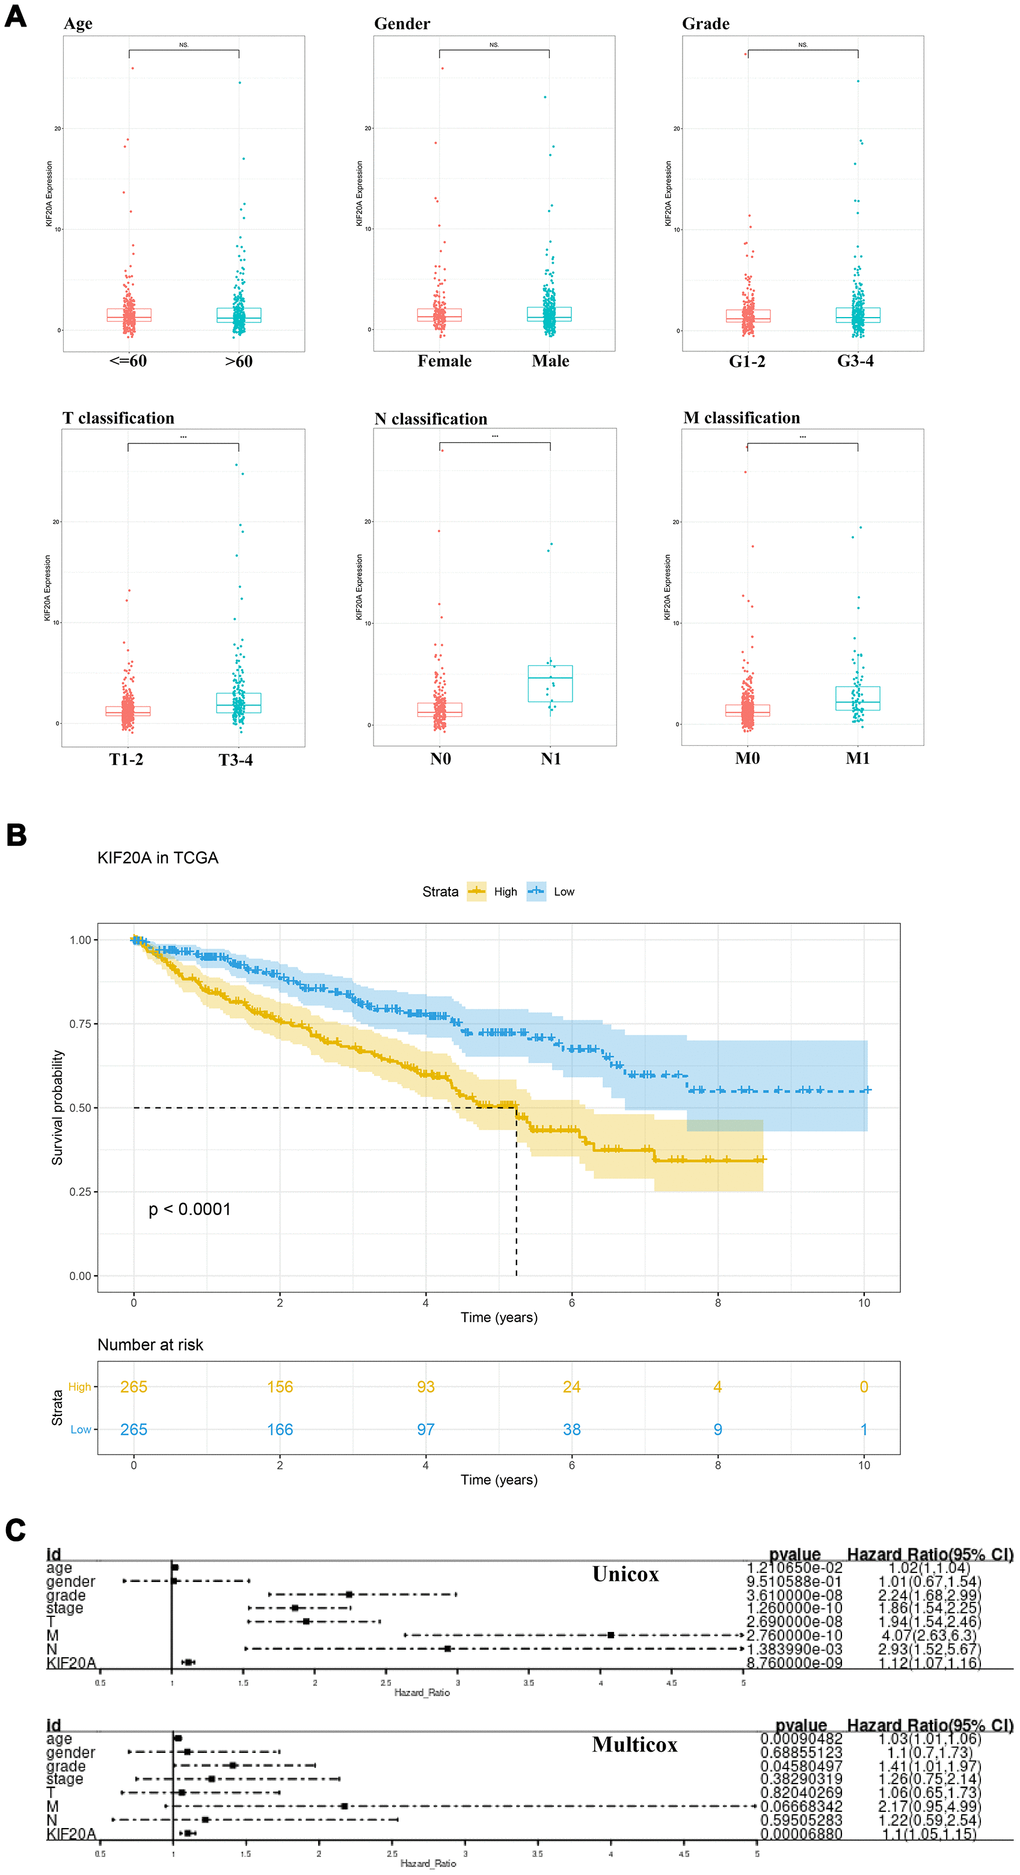 The clinical correlation and prognosis analysis of KIF20A. (A) The clinical correlation of KIF20A; (B) Kaplan-Meier curve of KIF20A expression in TCGA cohort; (C) Univariate and multivariate cox analysis of KIF20A and clinical variables.